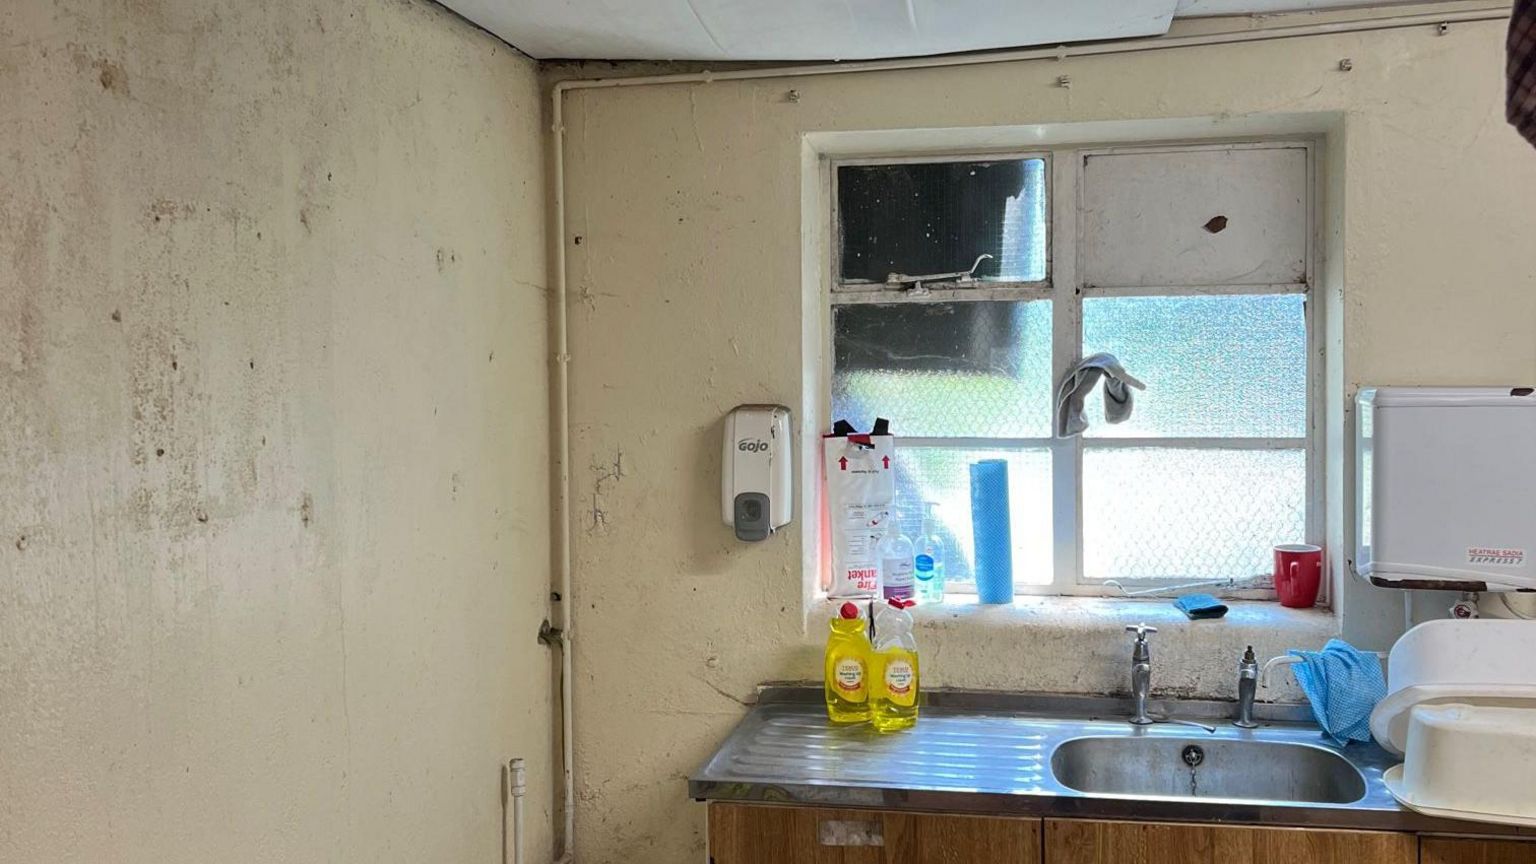 A kitchen in the hub building with a missing window and deteriorating walls